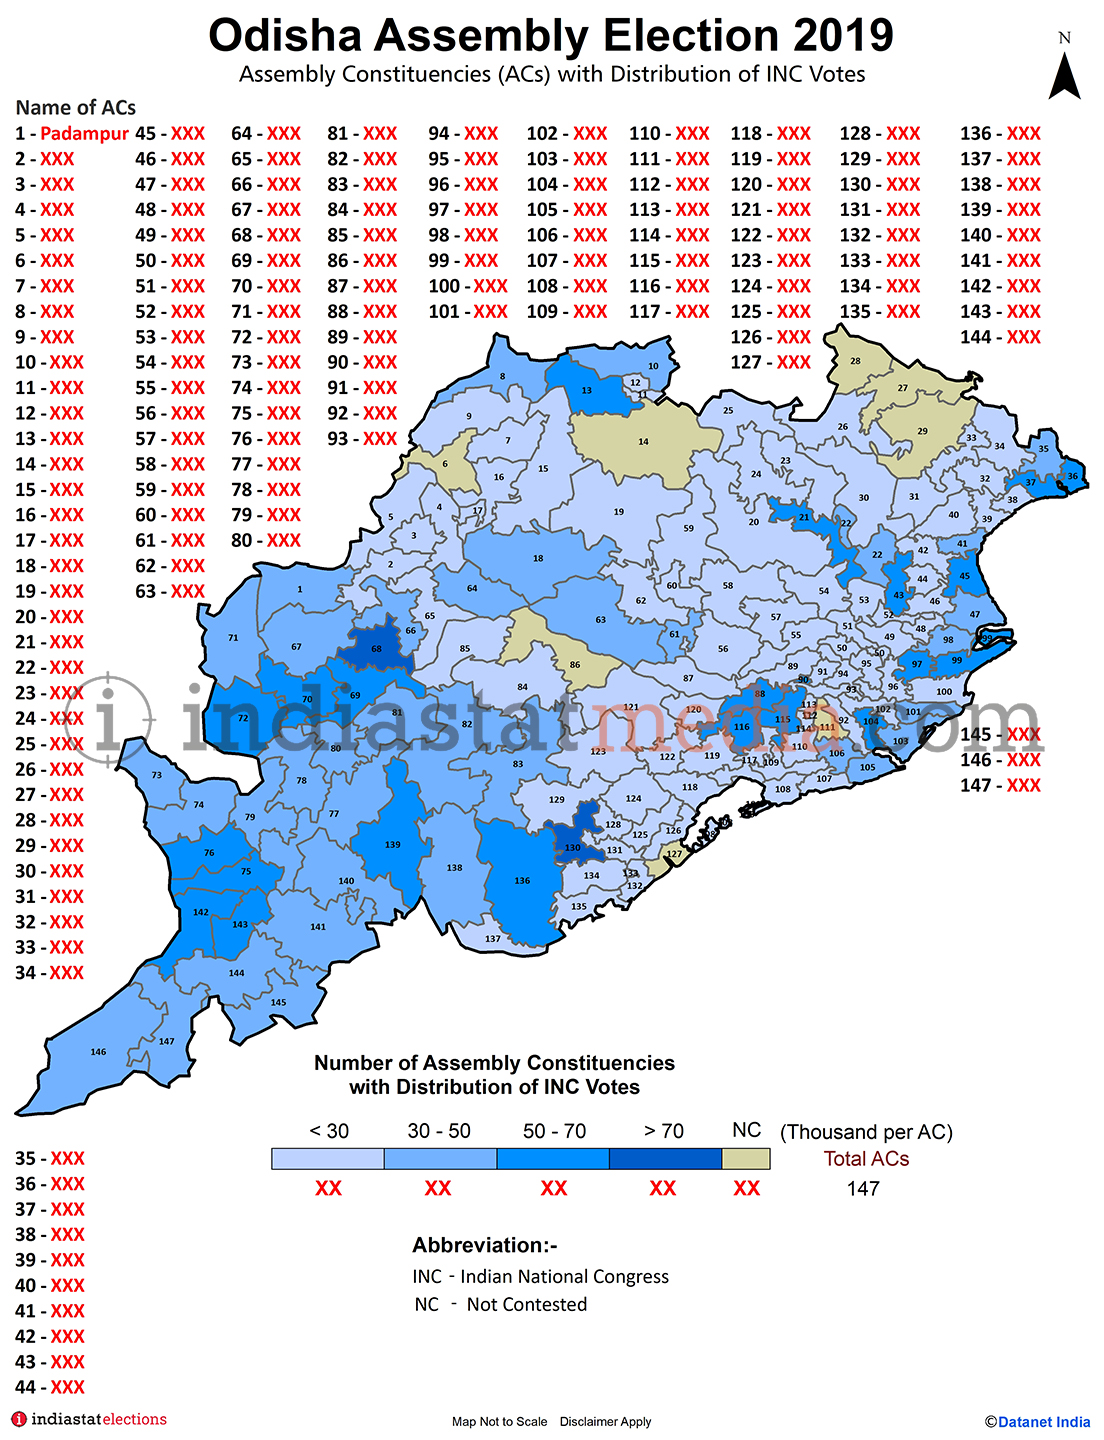 Distribution of INC Votes by Constituencies in Odisha (Assembly Election - 2019)